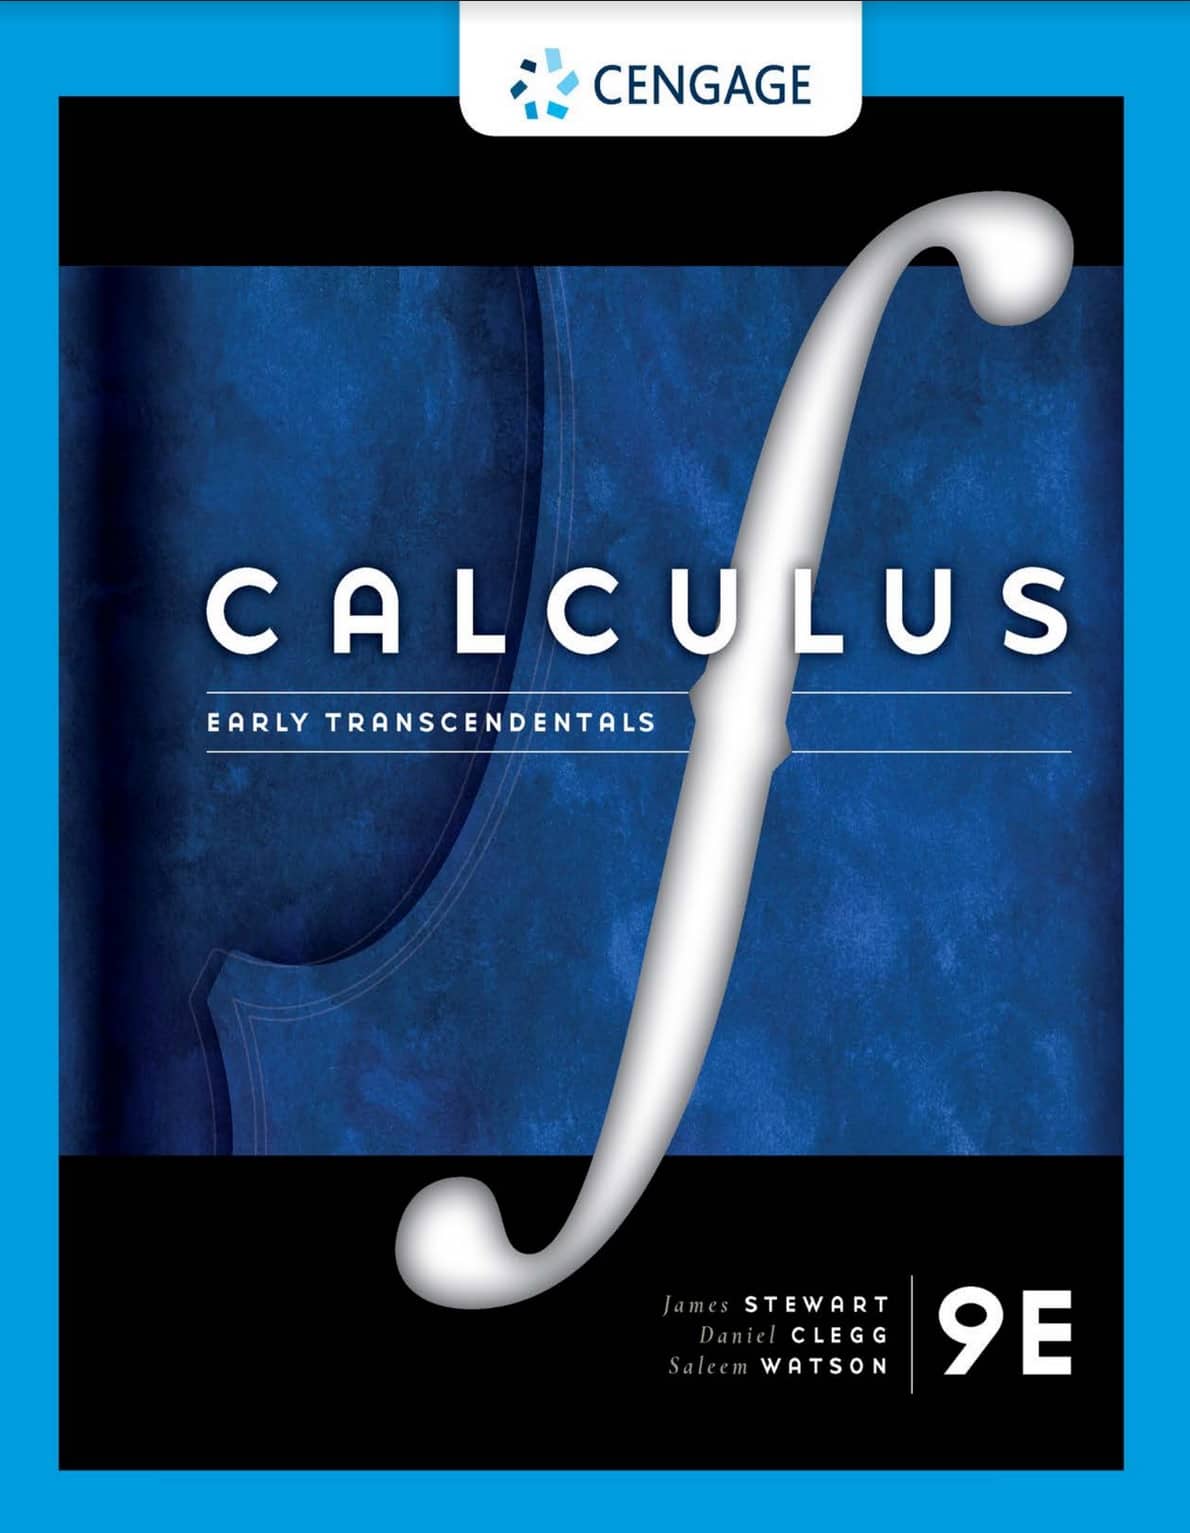 Calculus: Early Transcendentals (9th Edition)